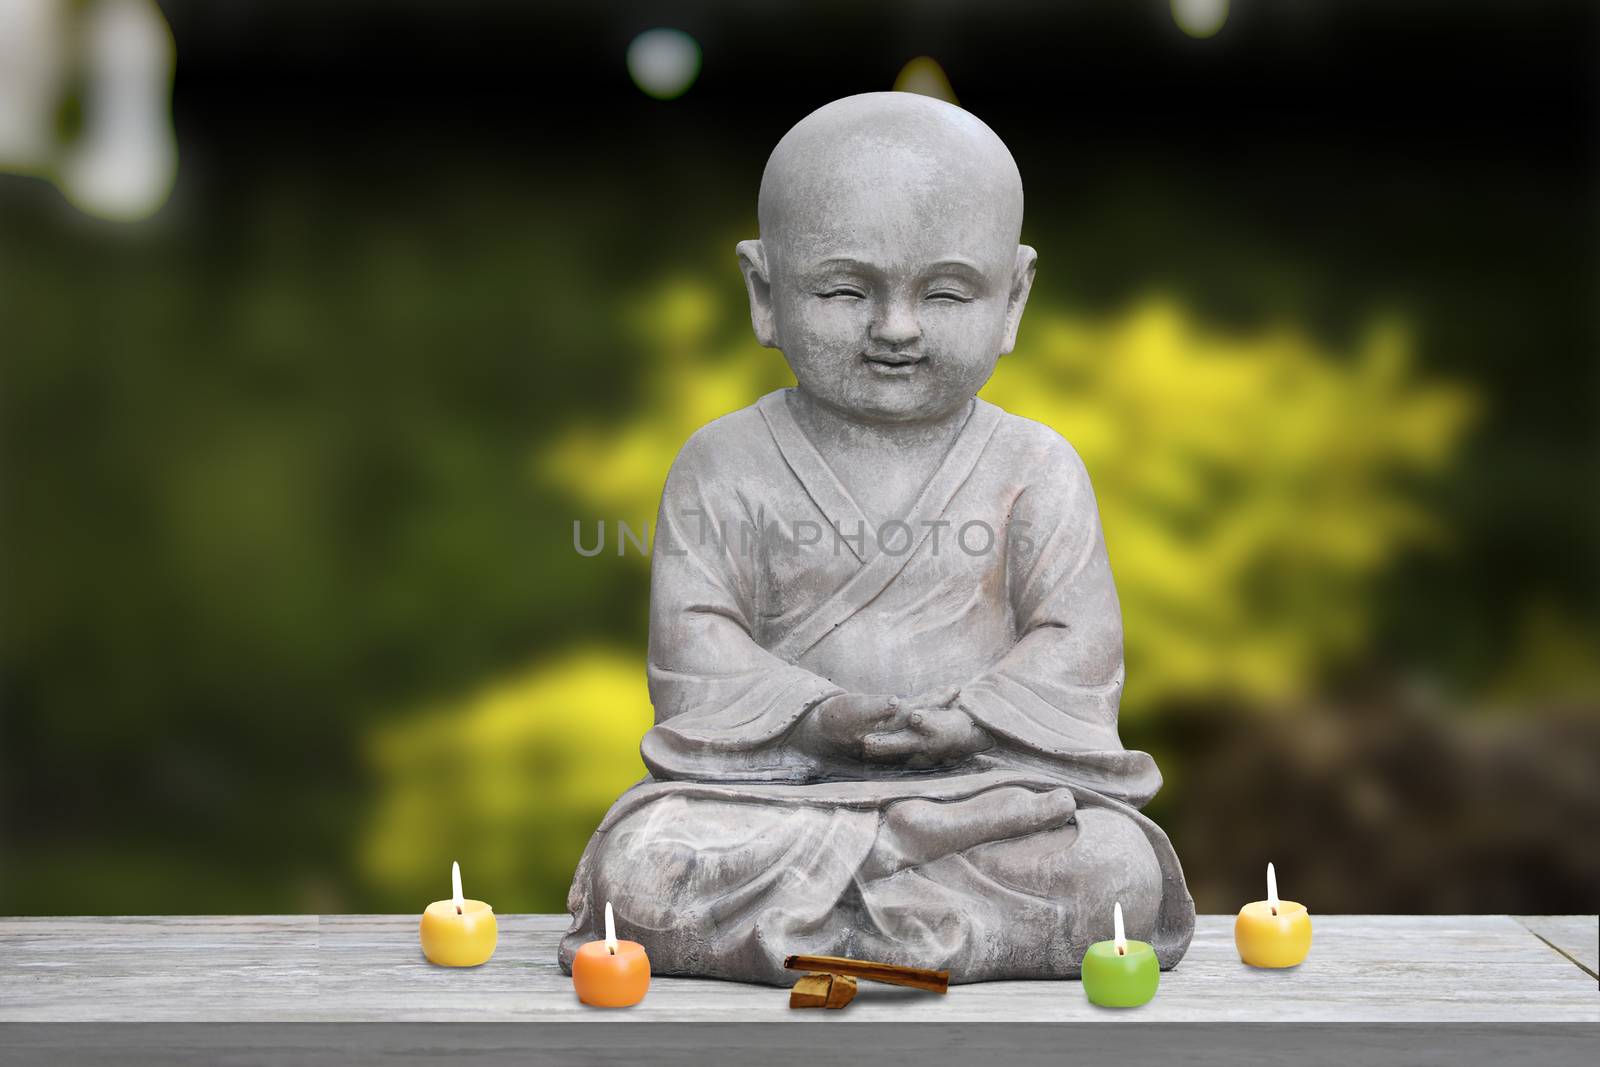 Buddha stone statue child background blur lit candles and incense